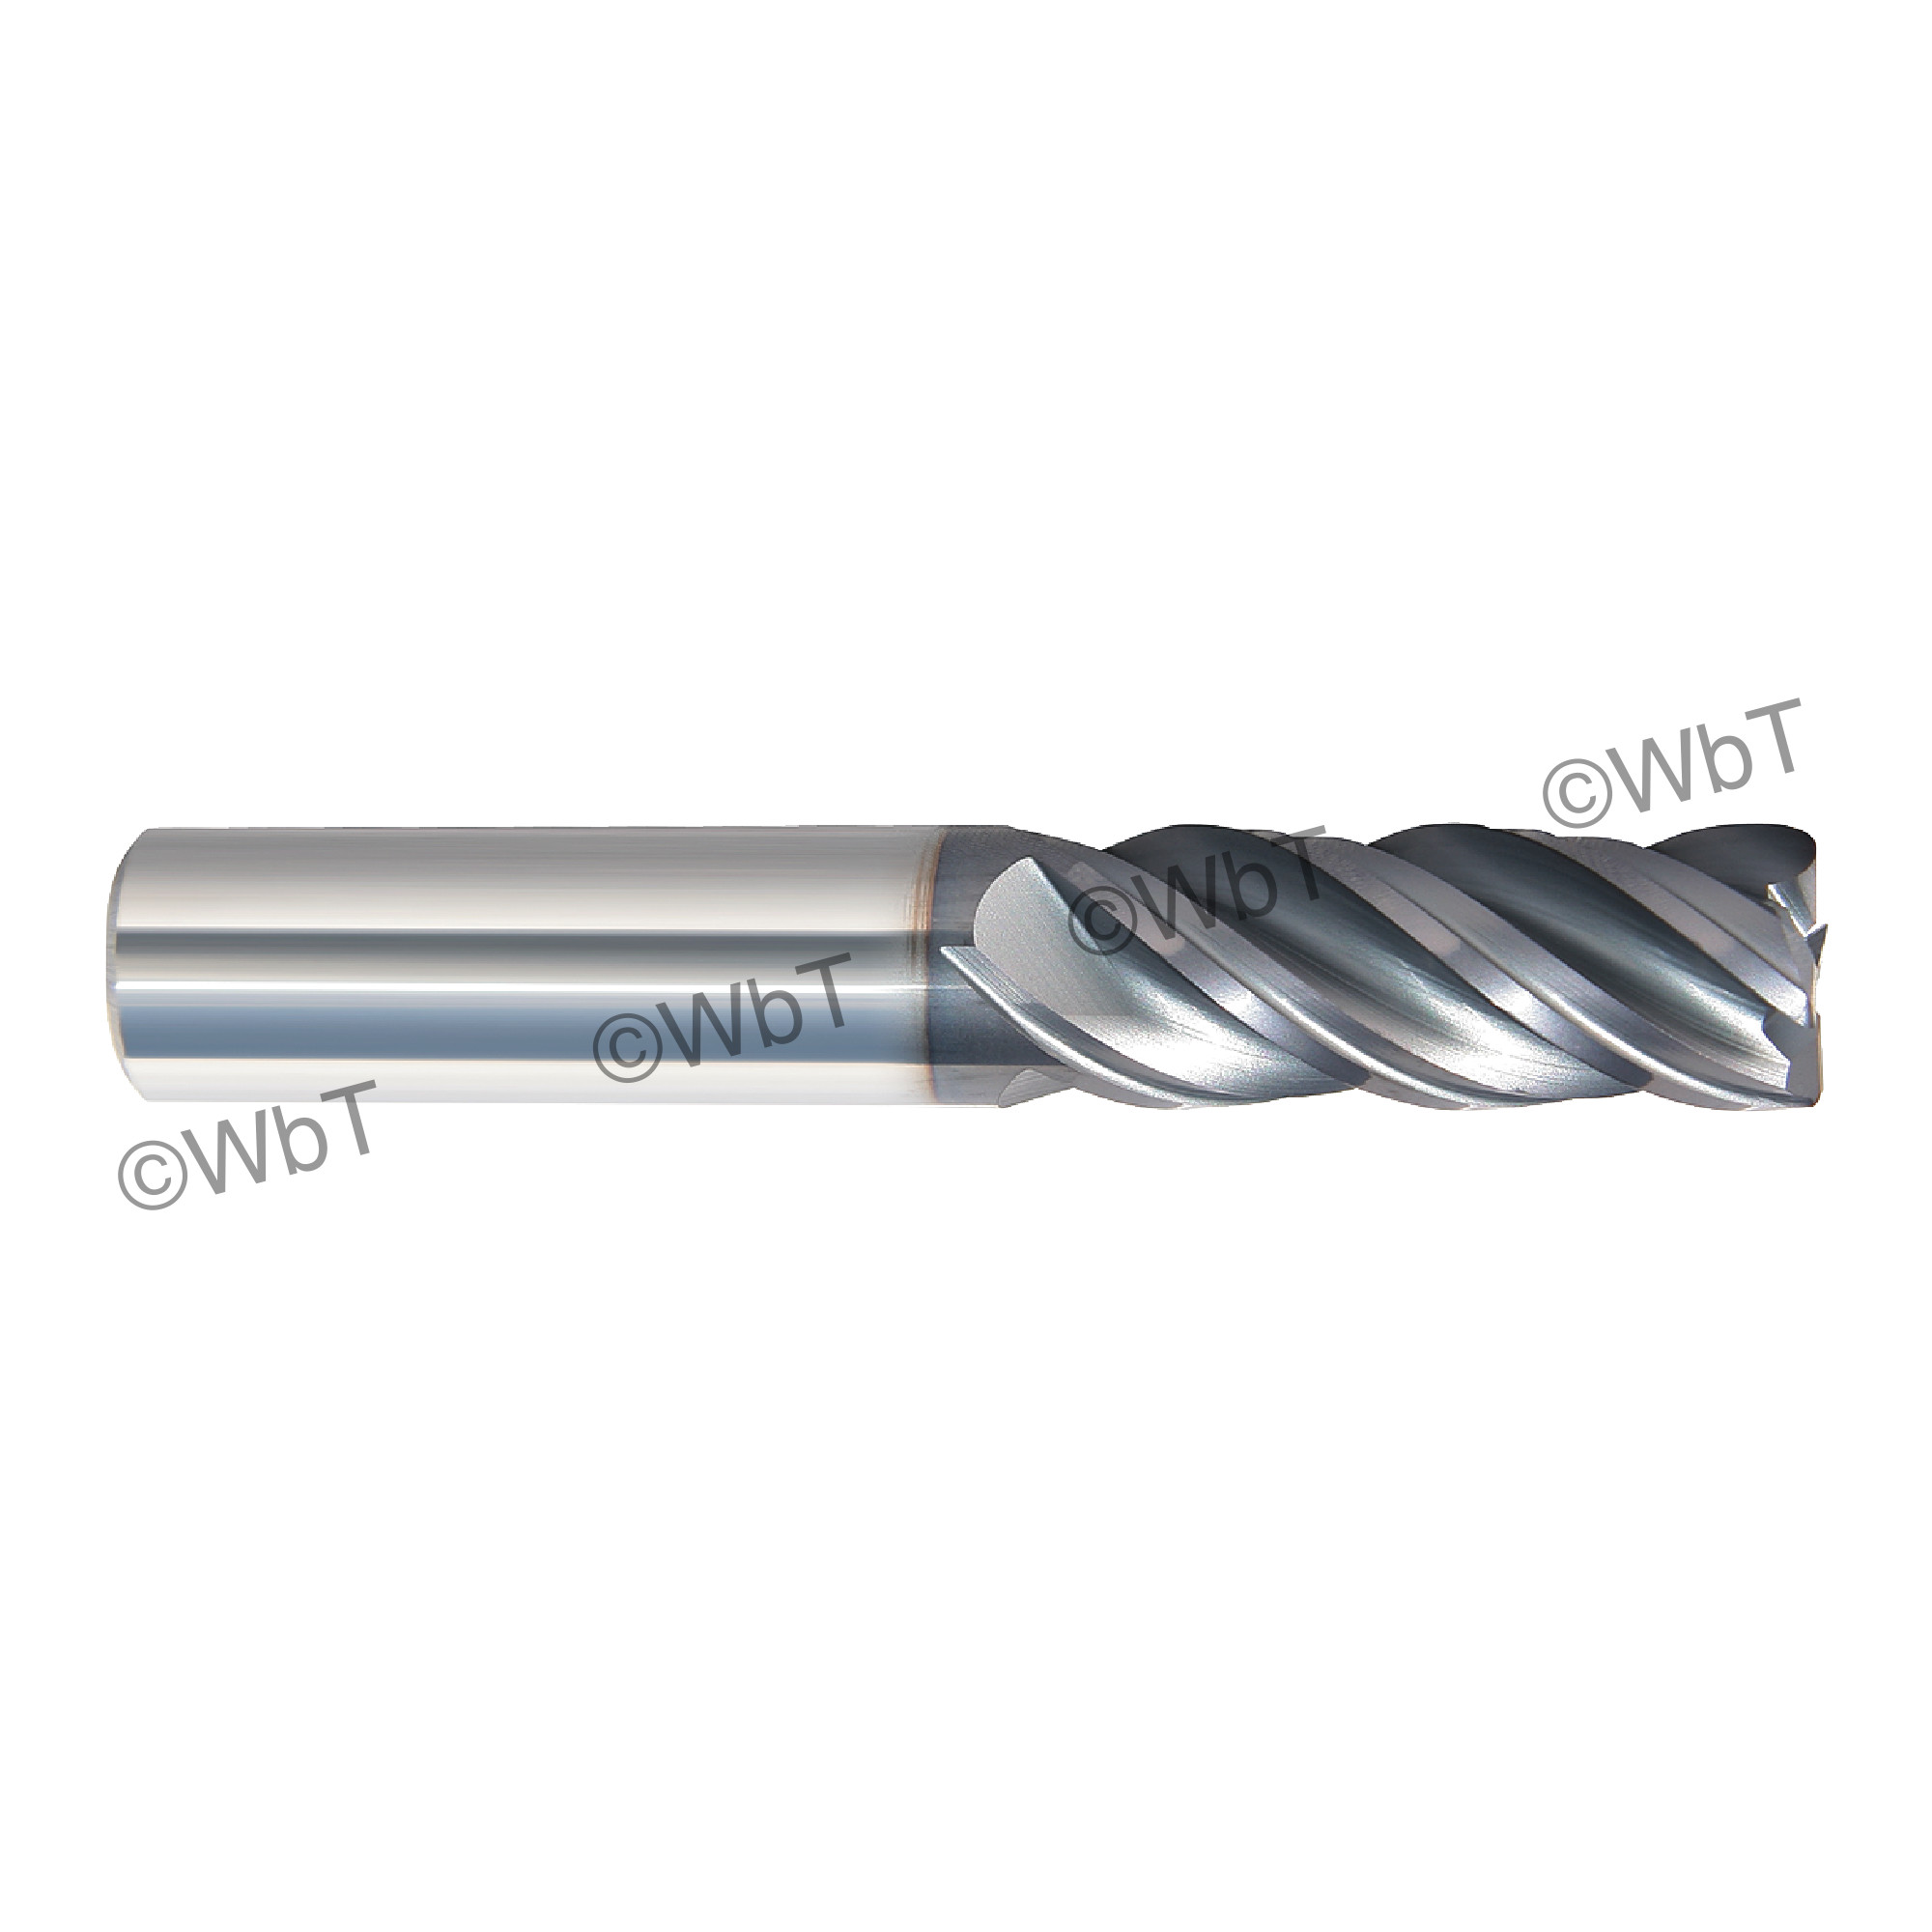 Rushmore USA 3/8" x 1-1/2" Flute Solid Carbide Variable Helix Unequal Index AlTiN Coated Corner Radius 4 Flute Roughing 